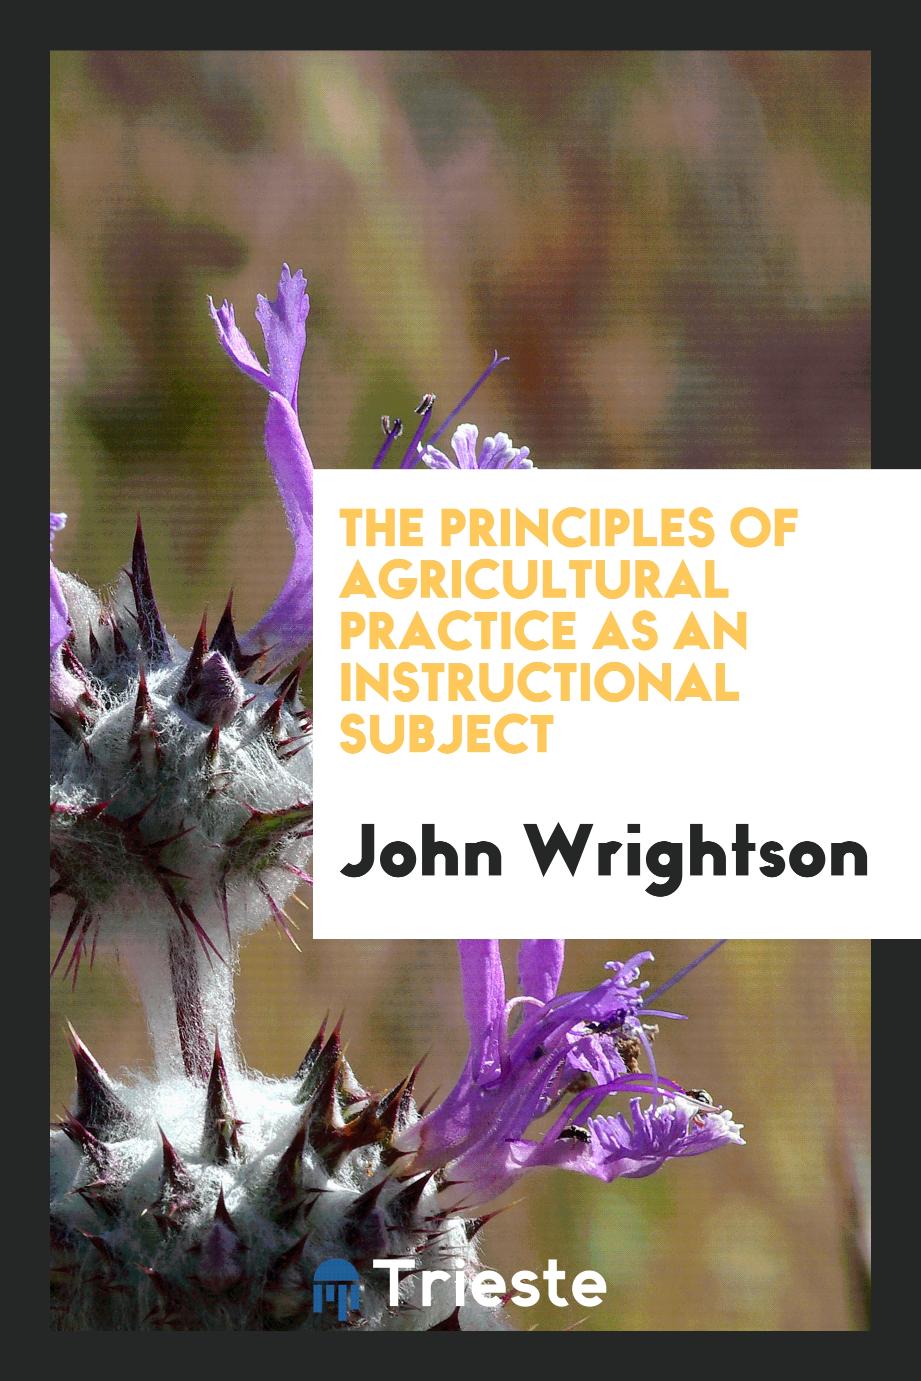 The principles of agricultural practice as an instructional subject